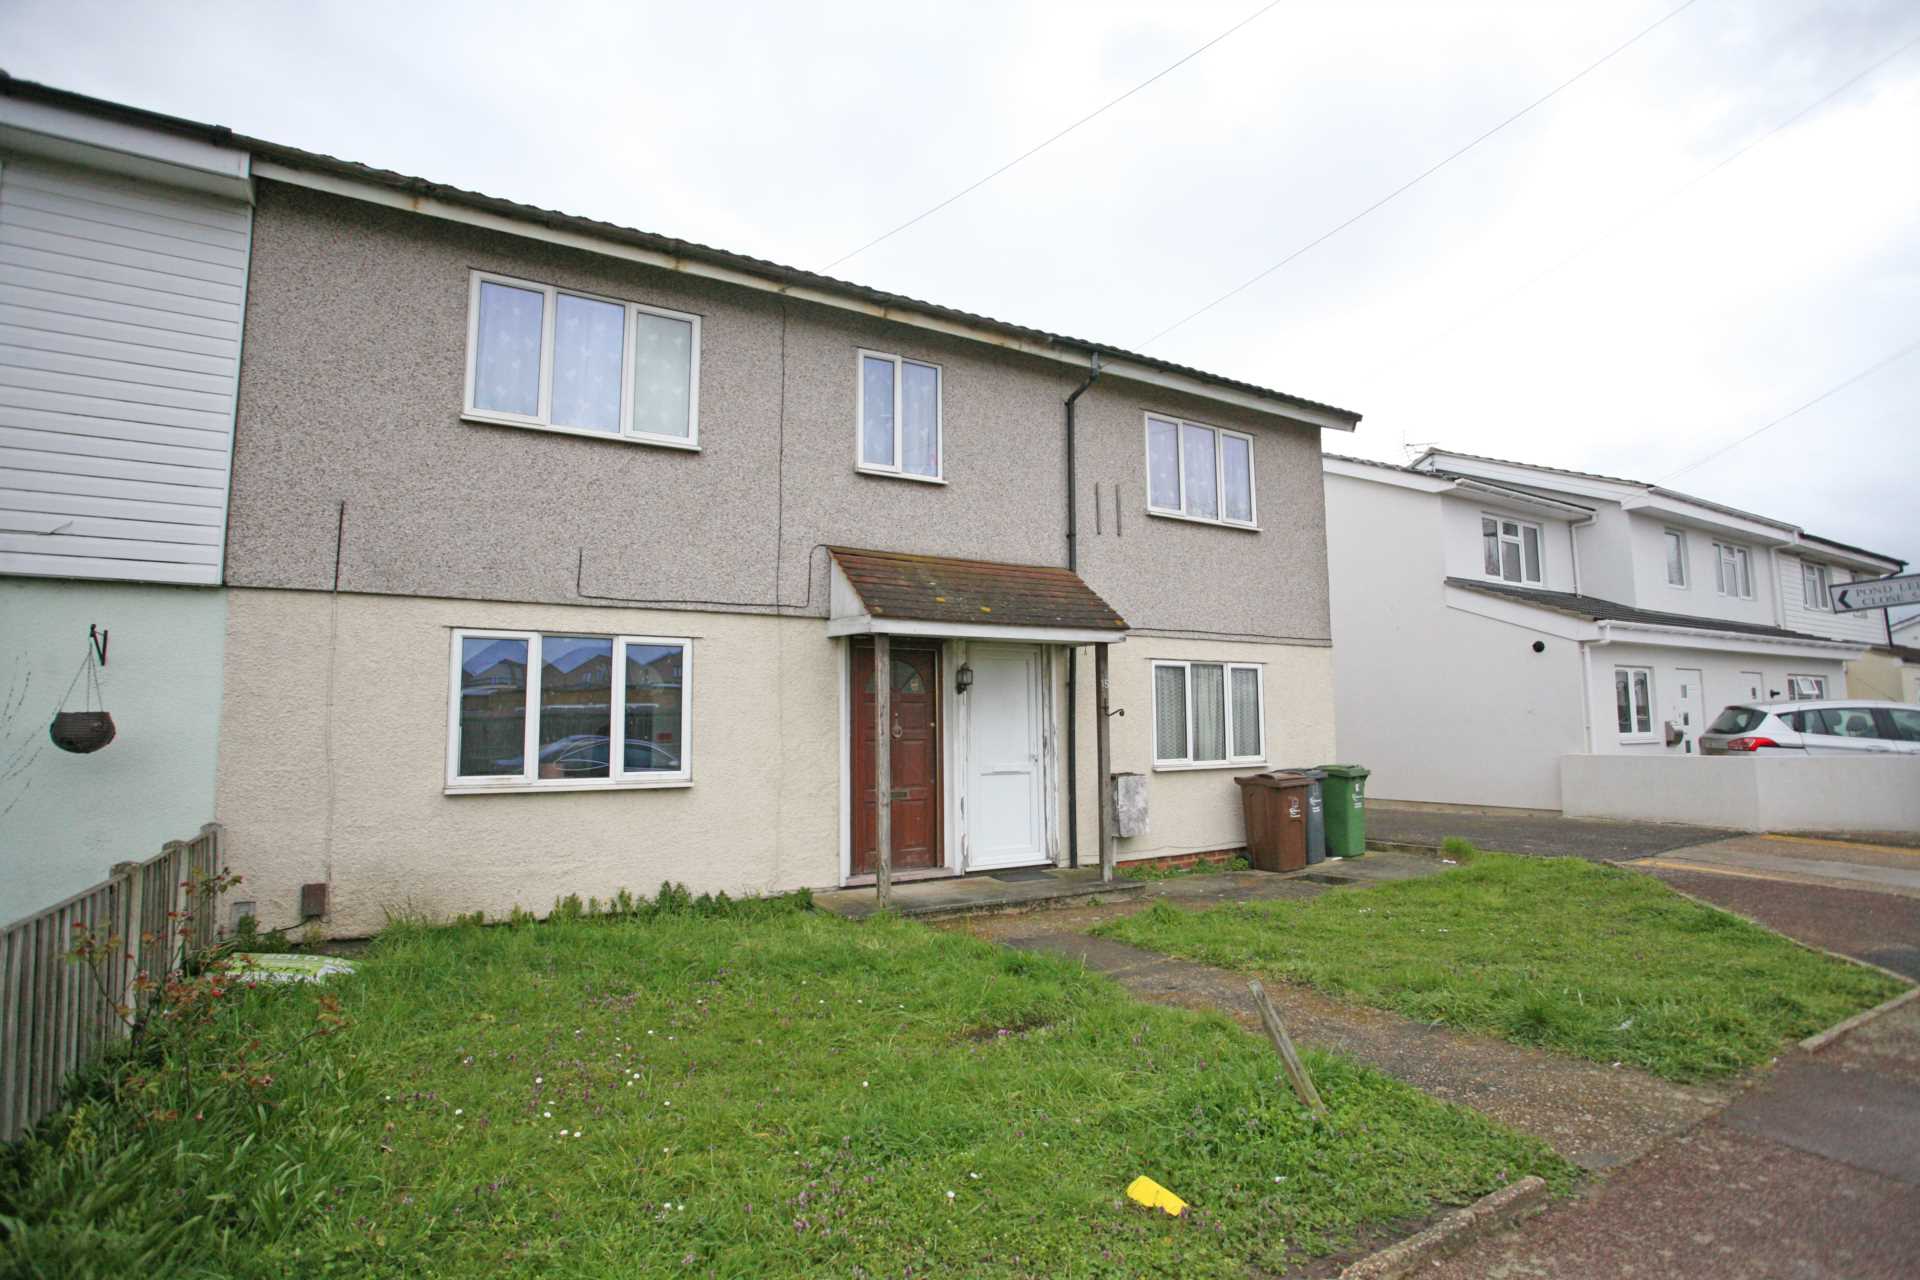 1 bed Flat for rent in Dagenham. From Real Move Estates